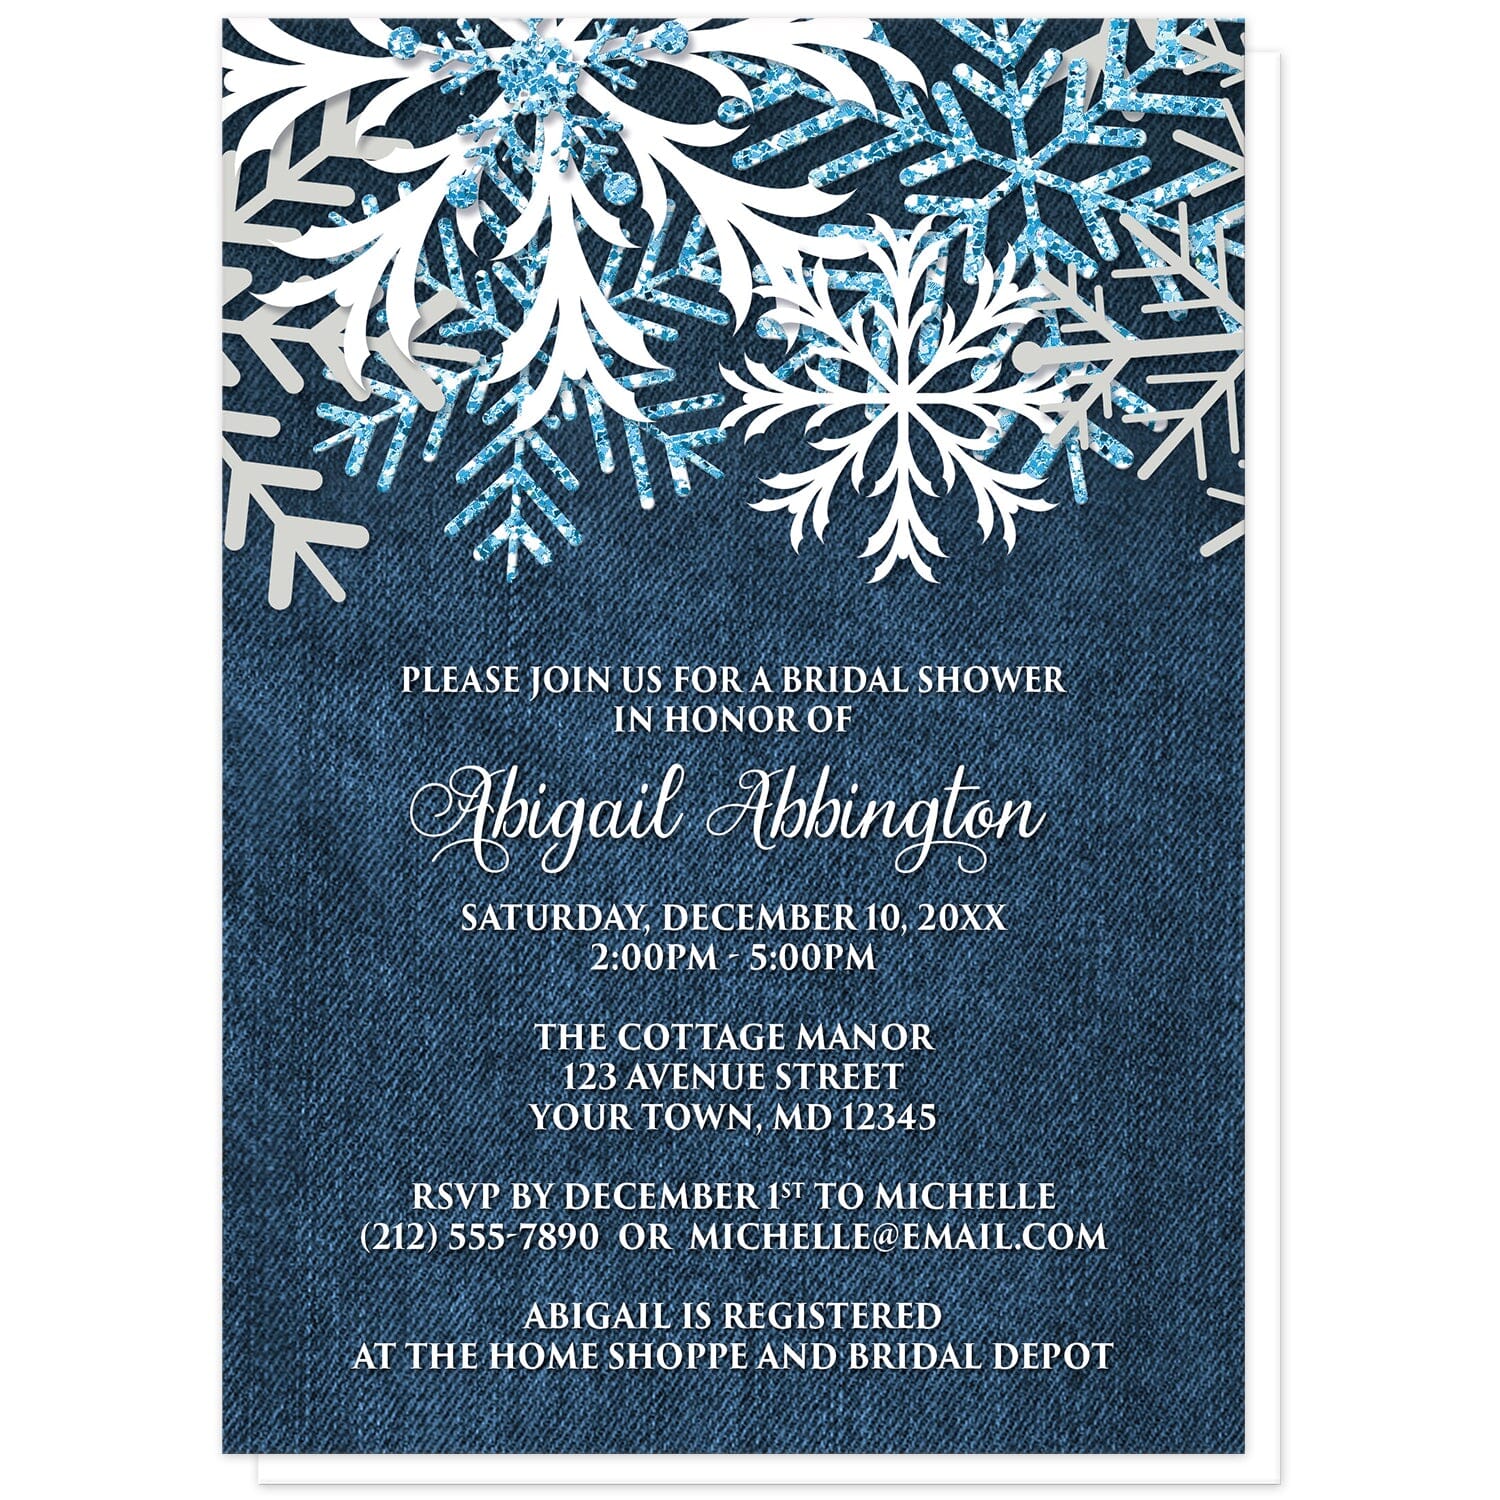 Rustic Snowflake Denim Winter Bridal Shower Invitations at Artistically Invited. Rustic snowflake denim winter bridal shower invitations with white, aqua blue glitter-illustrated, and light gray snowflakes along the top over a navy blue denim design. Your personalized bridal shower celebration details are custom printed in white over the blue denim background below the pretty snowflakes.